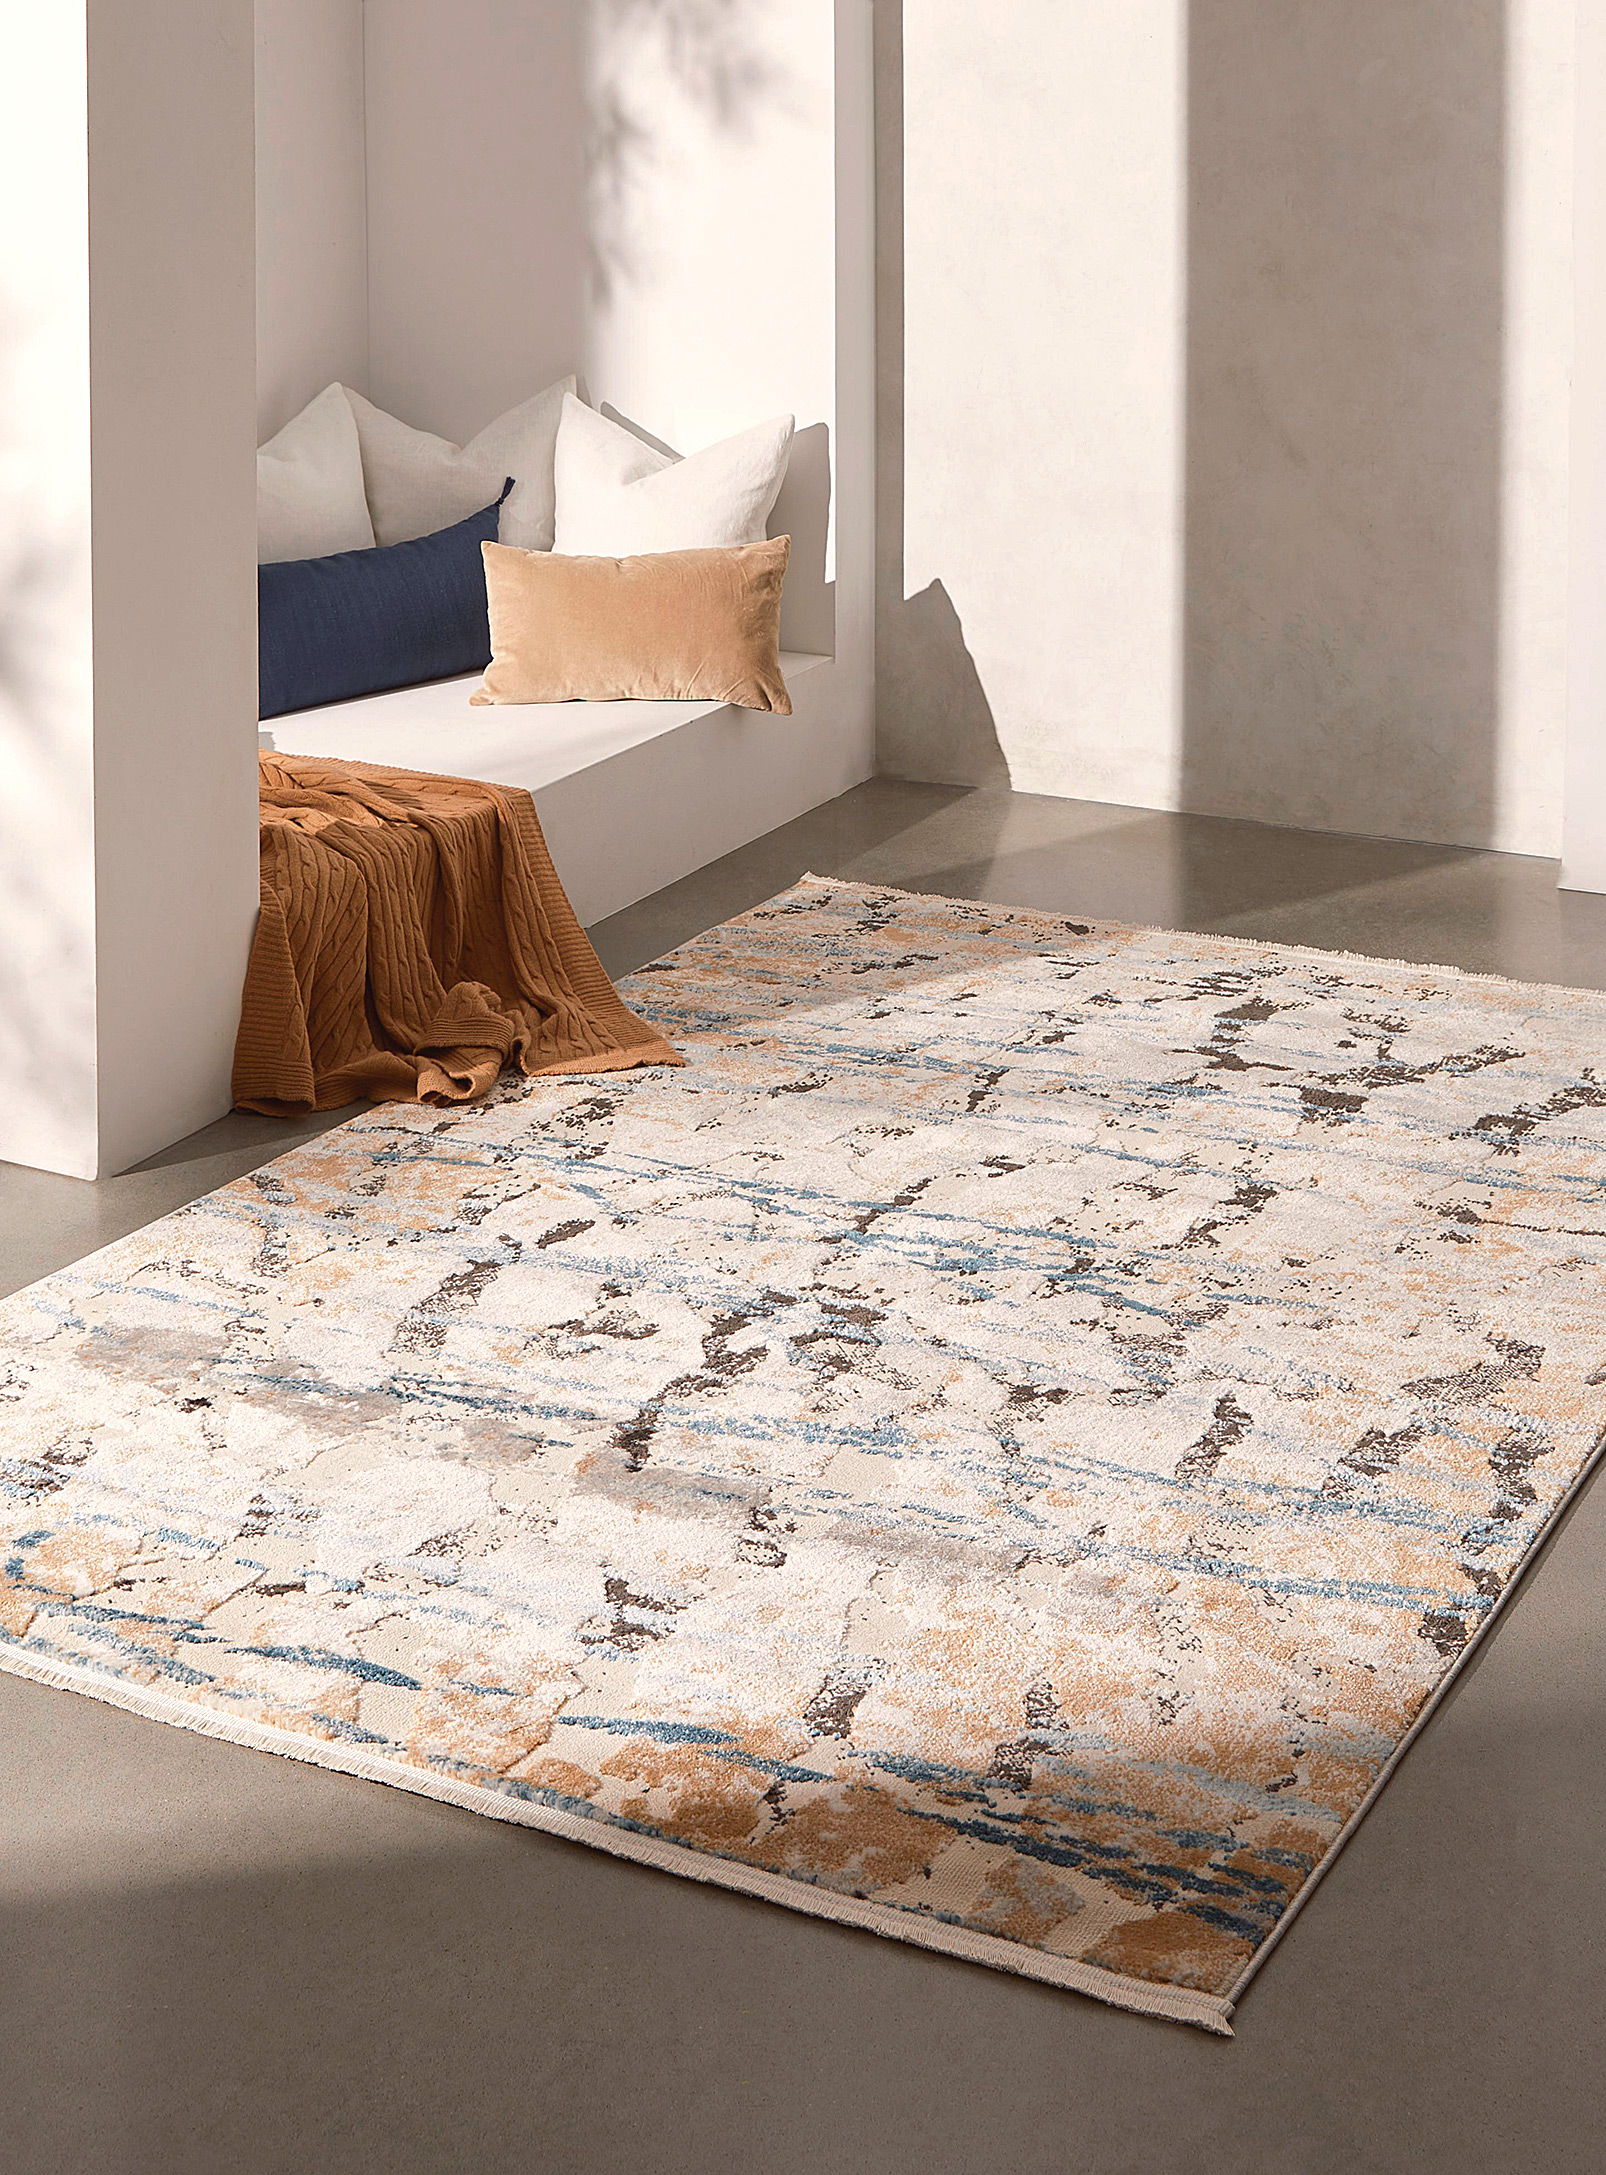 Simons Maison Artistic Abstraction Rug See Available Sizes In Patterned Blue